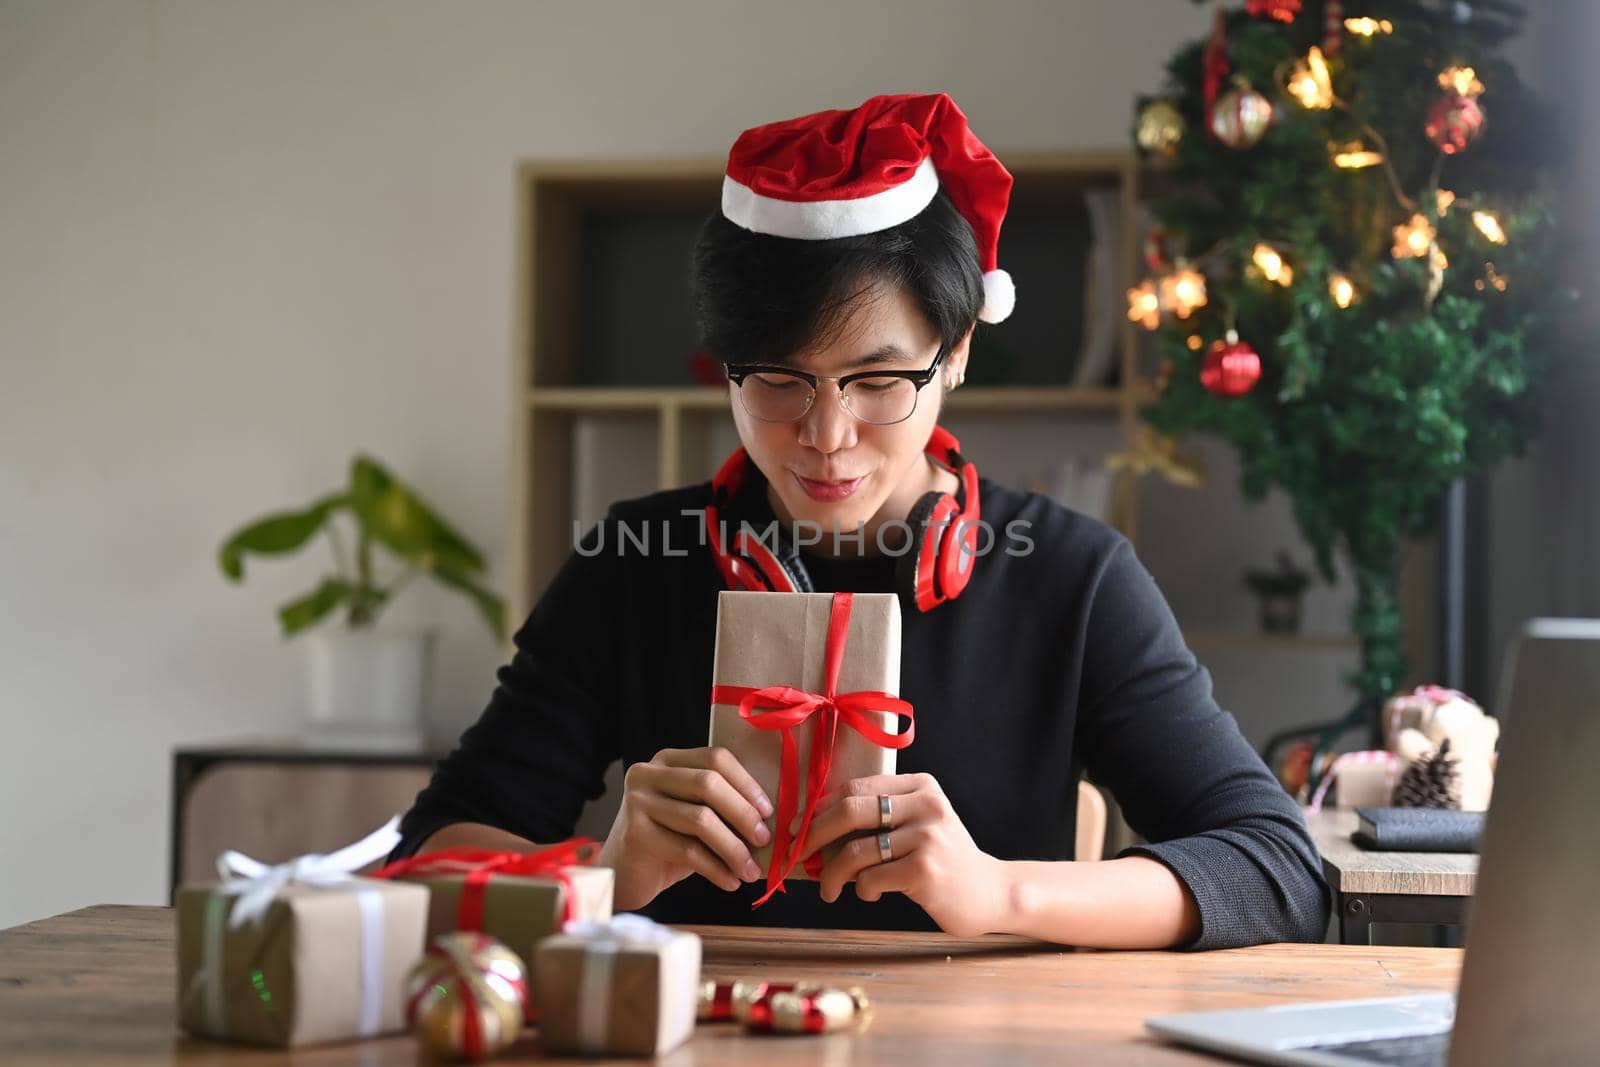 Young man in Santa hat holding Christmas presents with red ribbon.